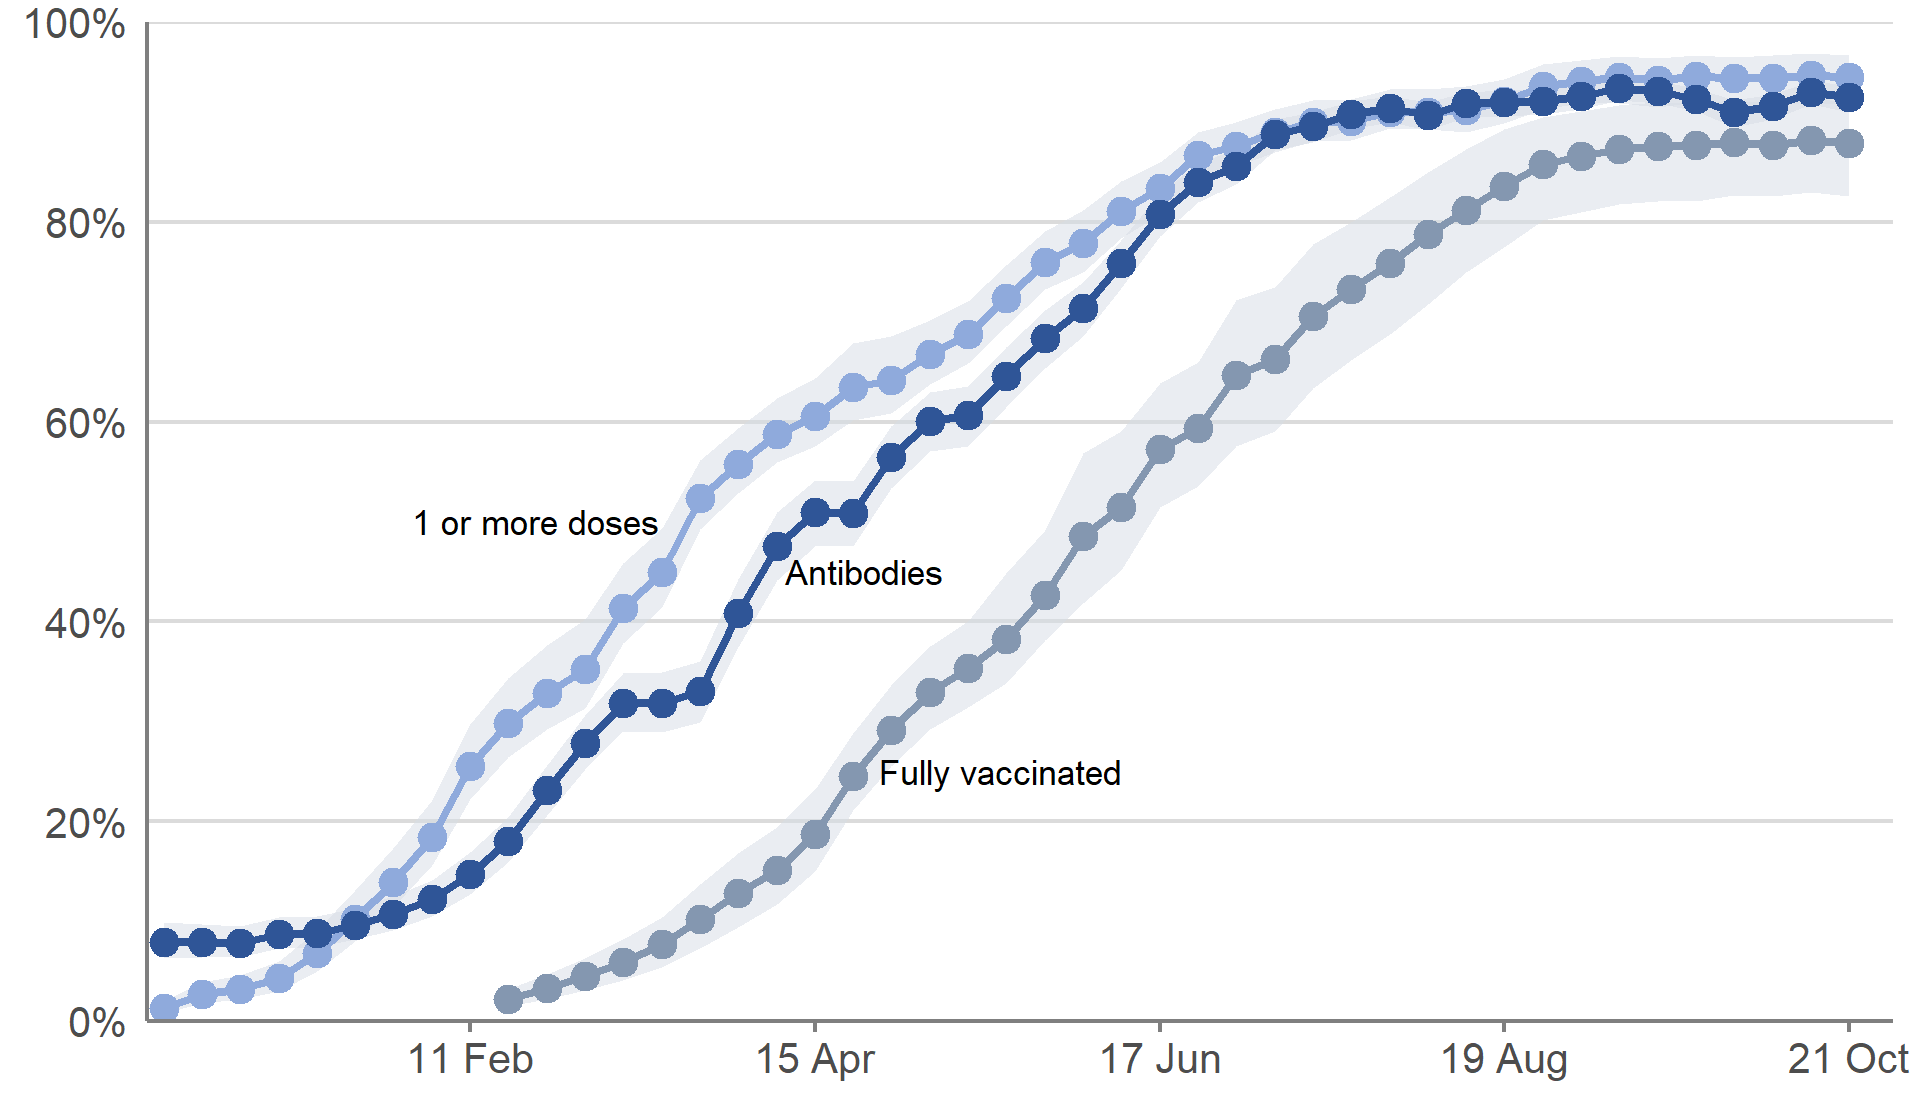 This chart shows modelled weekly estimates of the percentage of people in the community population that have received one or more doses of a COVID-19 vaccine and modelled weekly estimates of the percentage of people testing positive for antibodies to SARS-CoV-2 from a blood sample, from 7 December 2020  to the week beginning 18 October 2021.   There is a clear pattern between vaccination and testing positive for antibodies to SARS-CoV-2 (the specific virus that causes COVID-19), but the detection of antibodies alone is not a precise measure of the immunity protection given by vaccination.